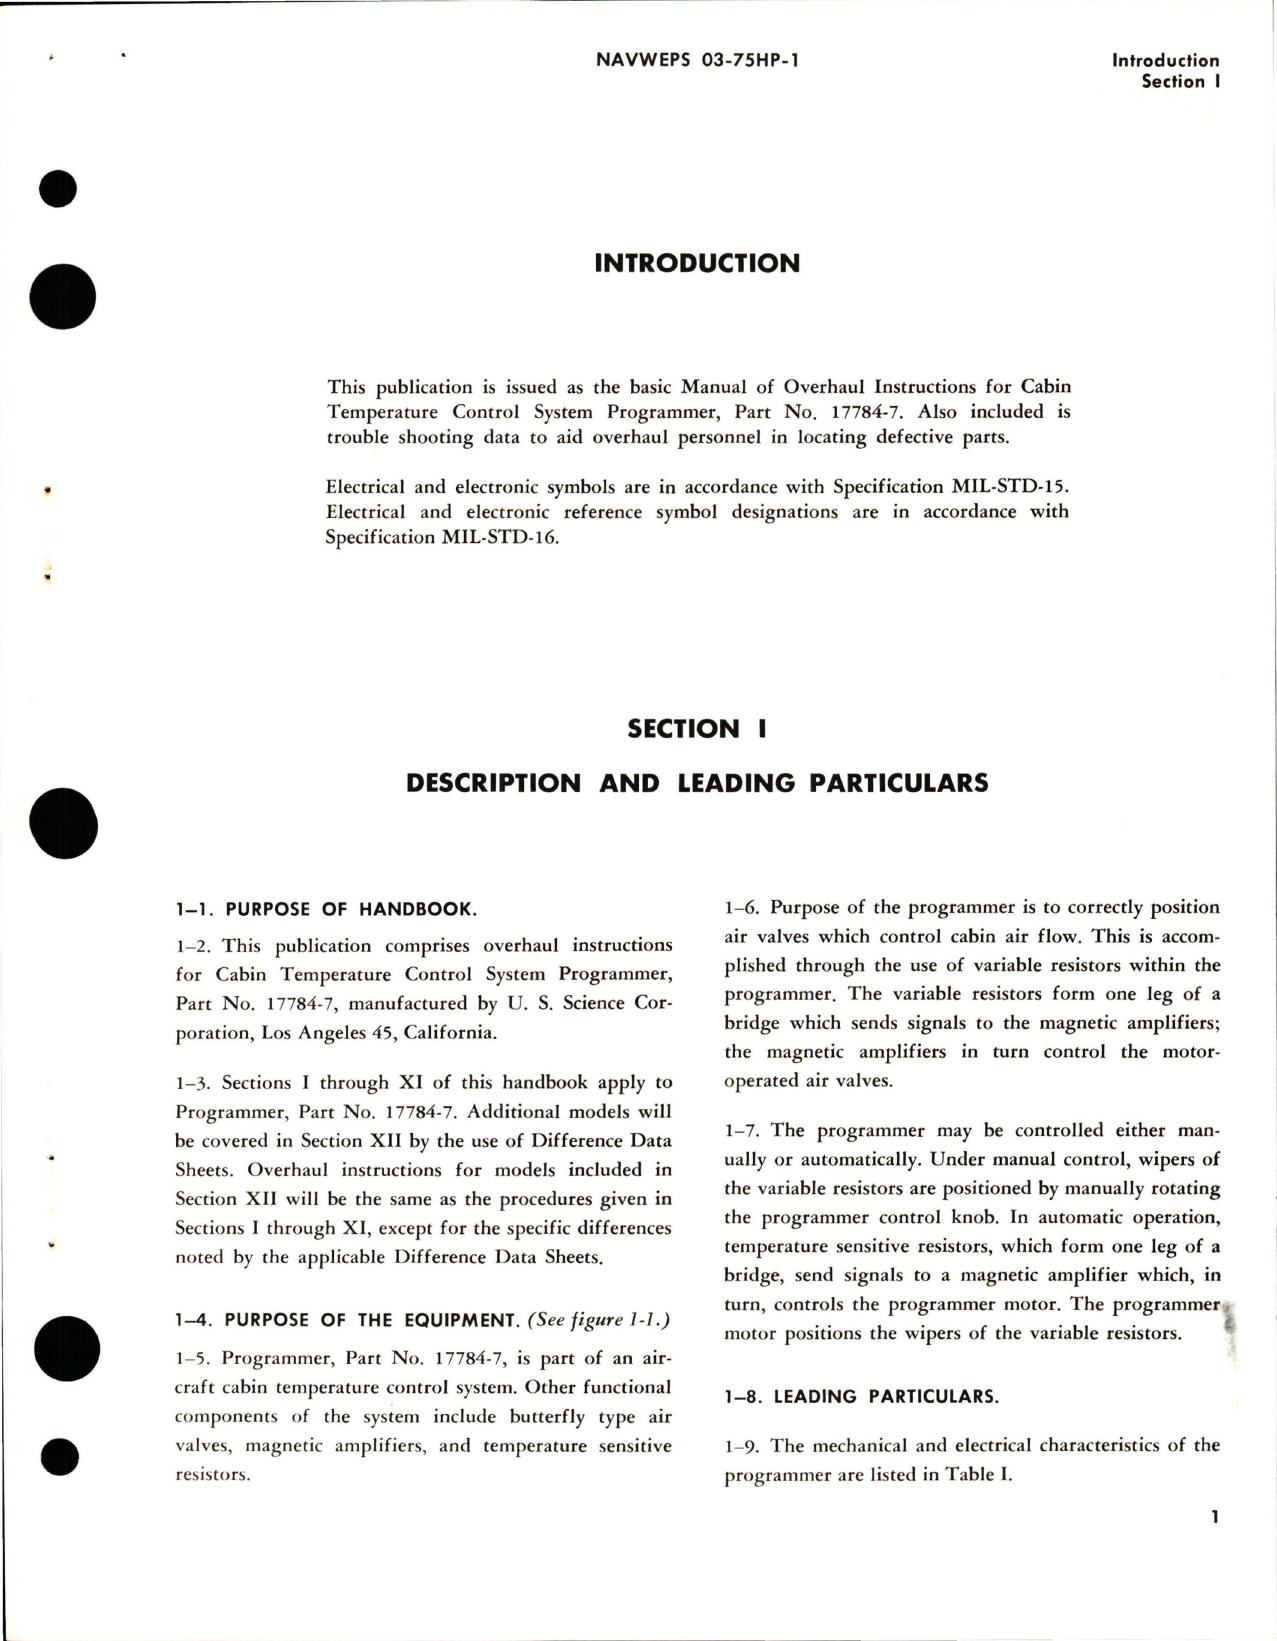 Sample page 5 from AirCorps Library document: Overhaul Instructions for Cabin Temperature Control System Programmer - Parts 17784-7 and 17784-9